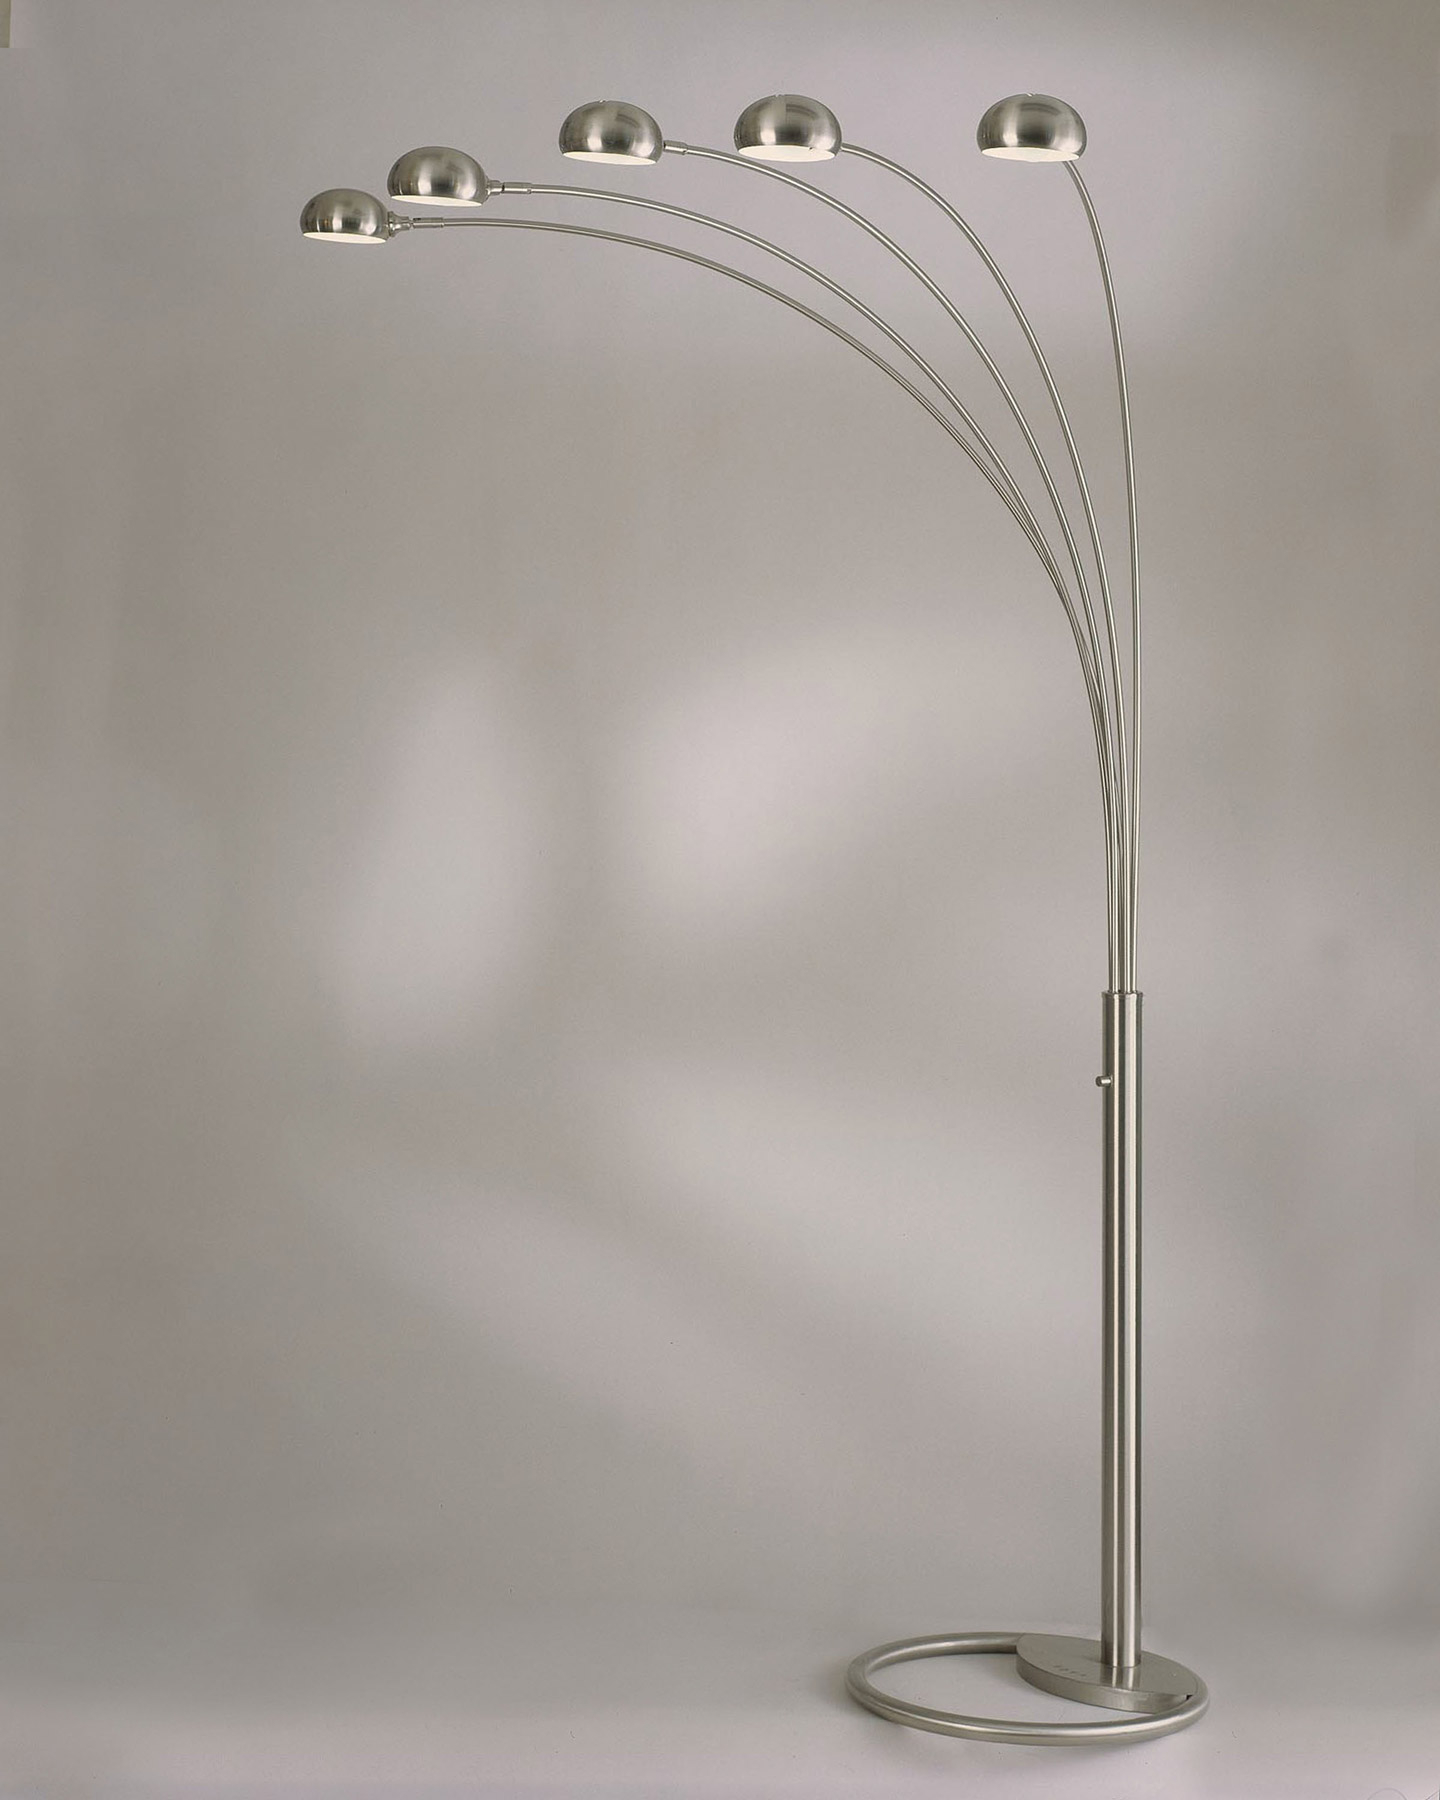 5 Bulb Floor Lamp A Sense Of Beauty For Your Space intended for dimensions 1440 X 1800